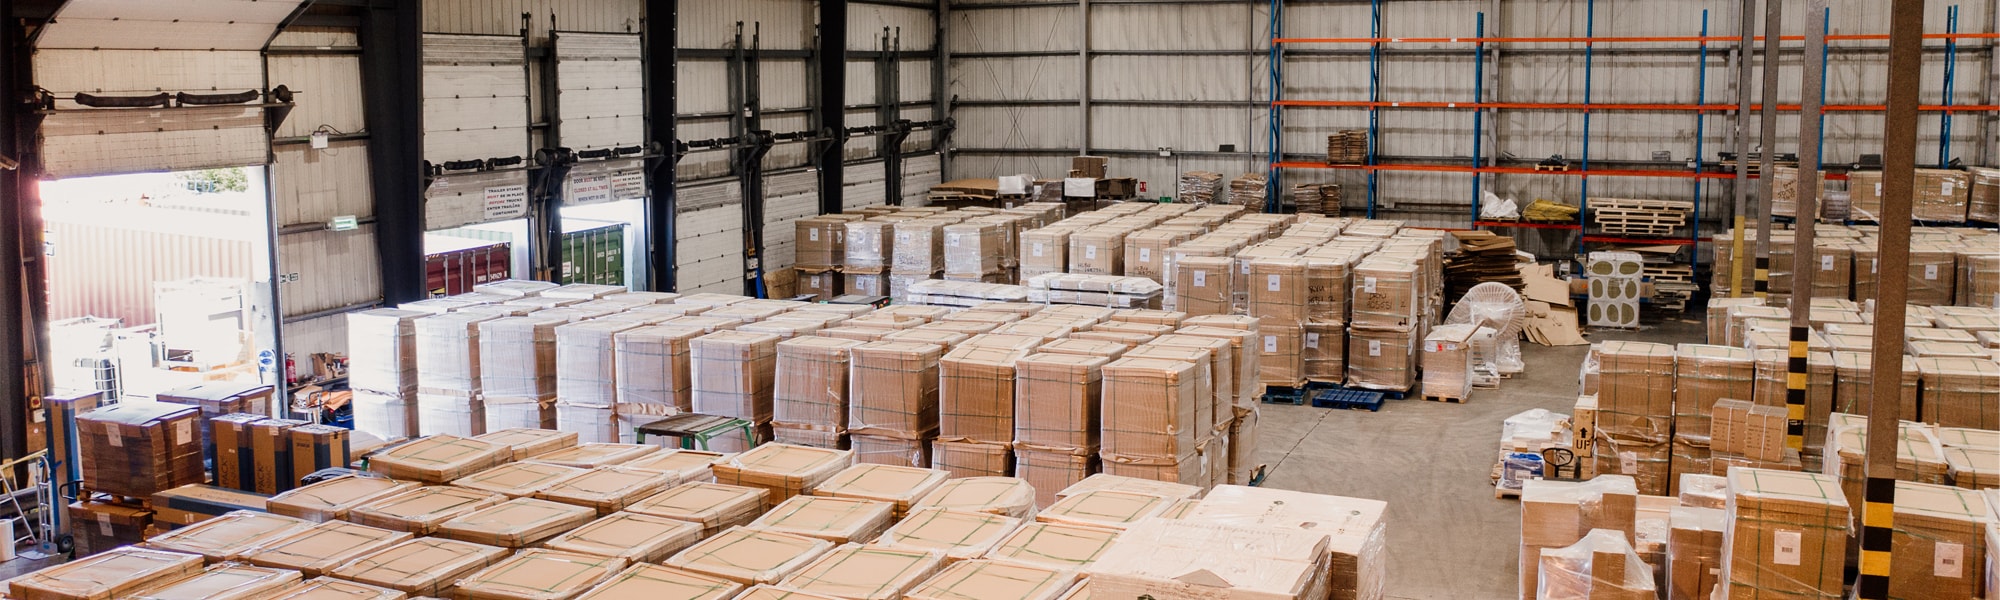 Maintaining Warehouse Safety During and Post-Lockdown